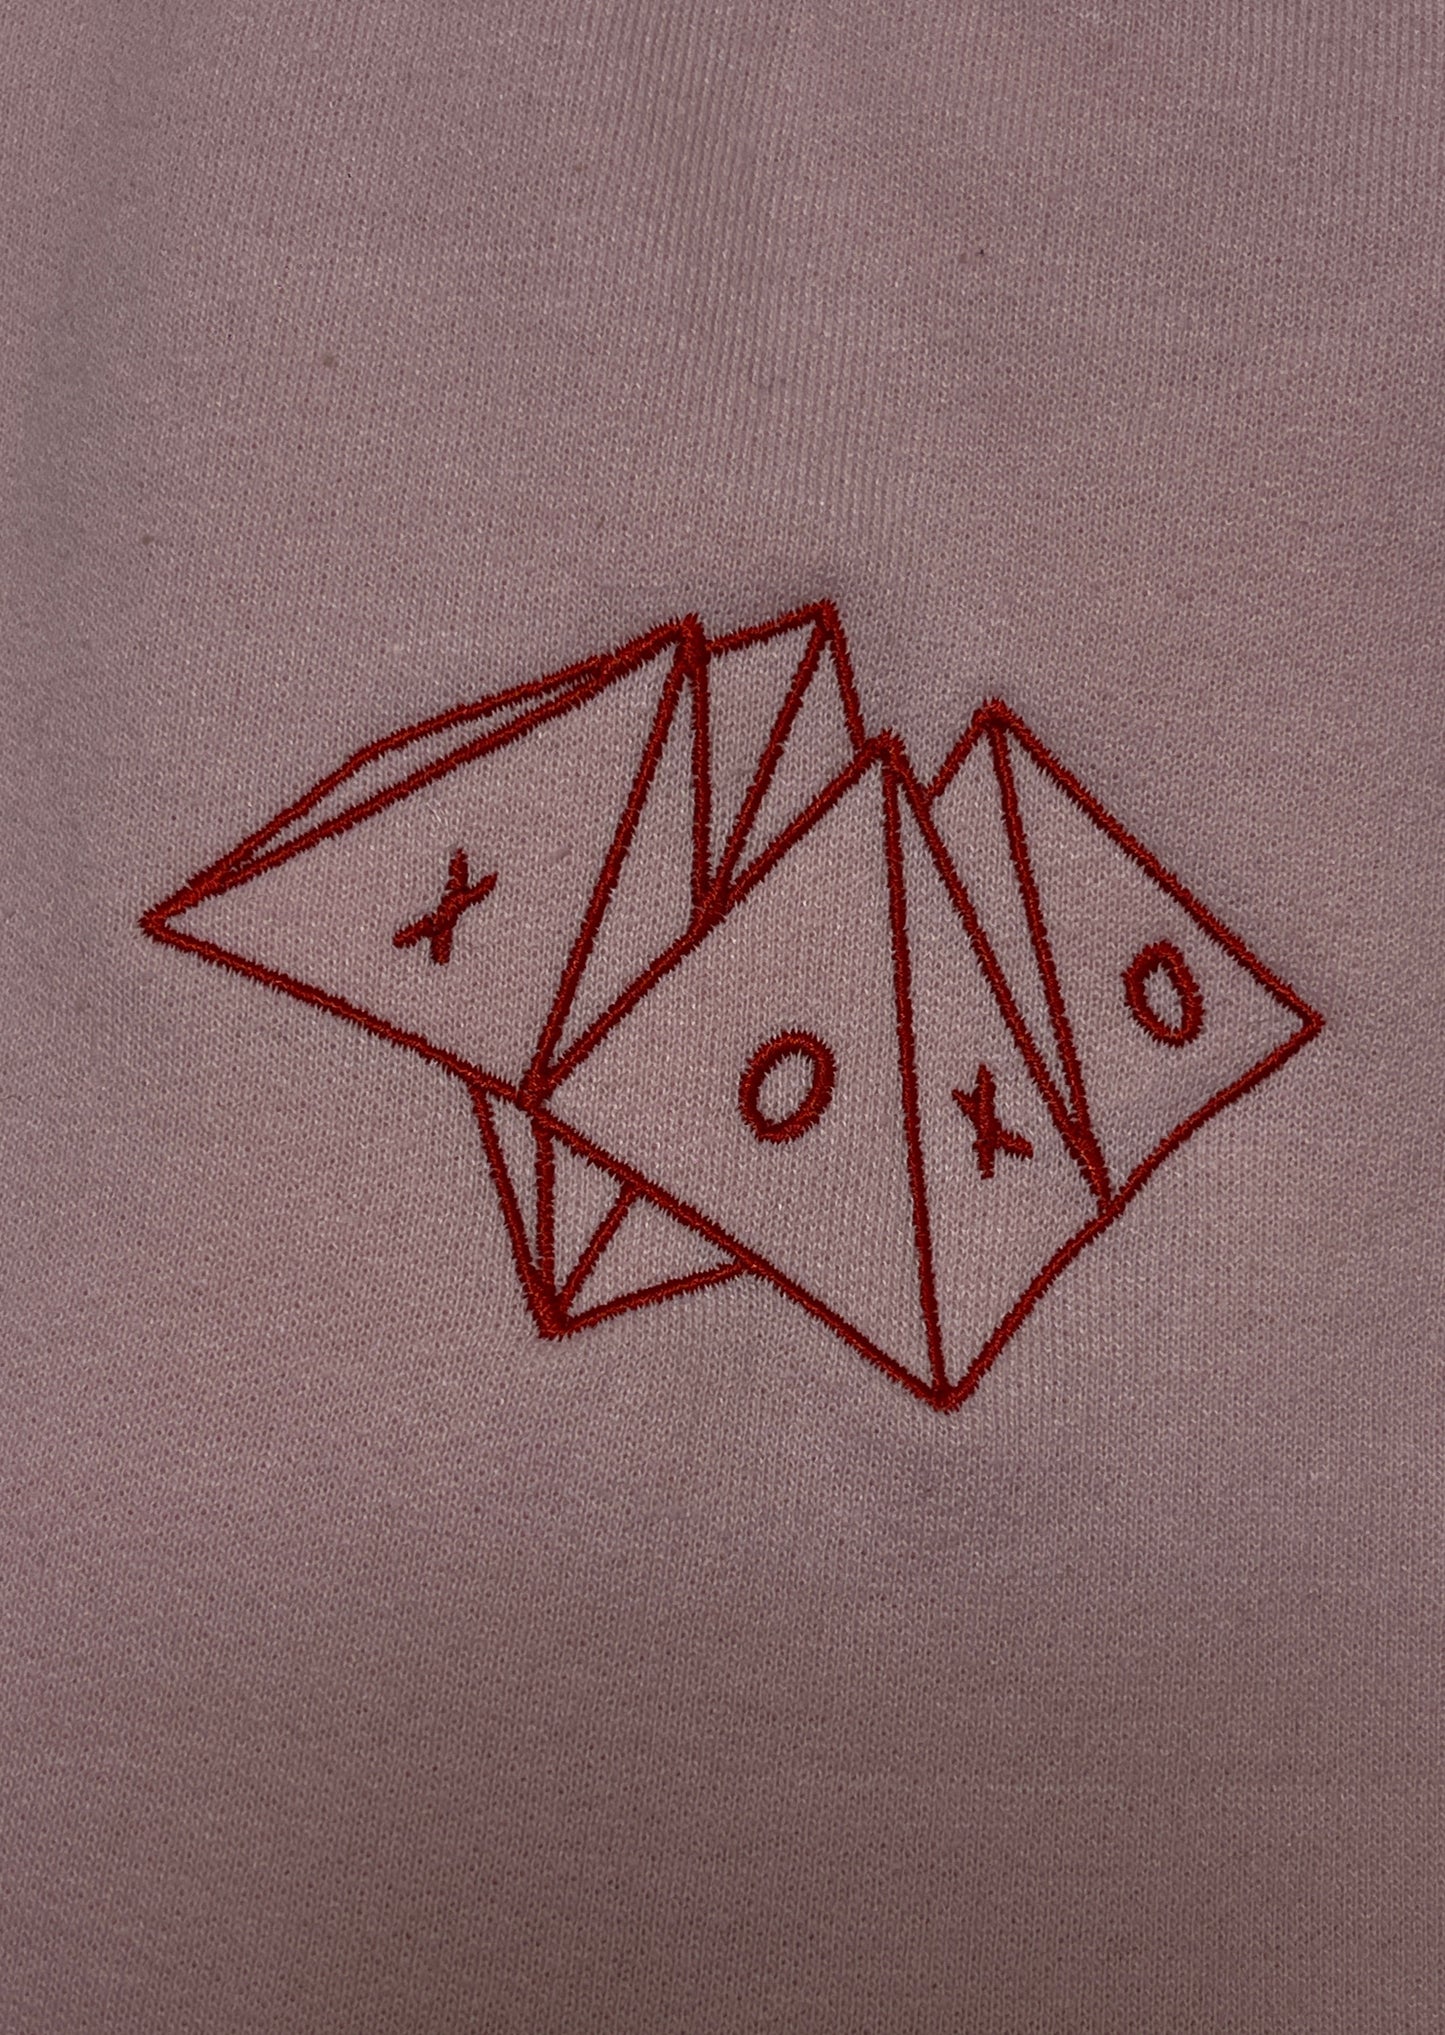 Fortune Teller Embroidery